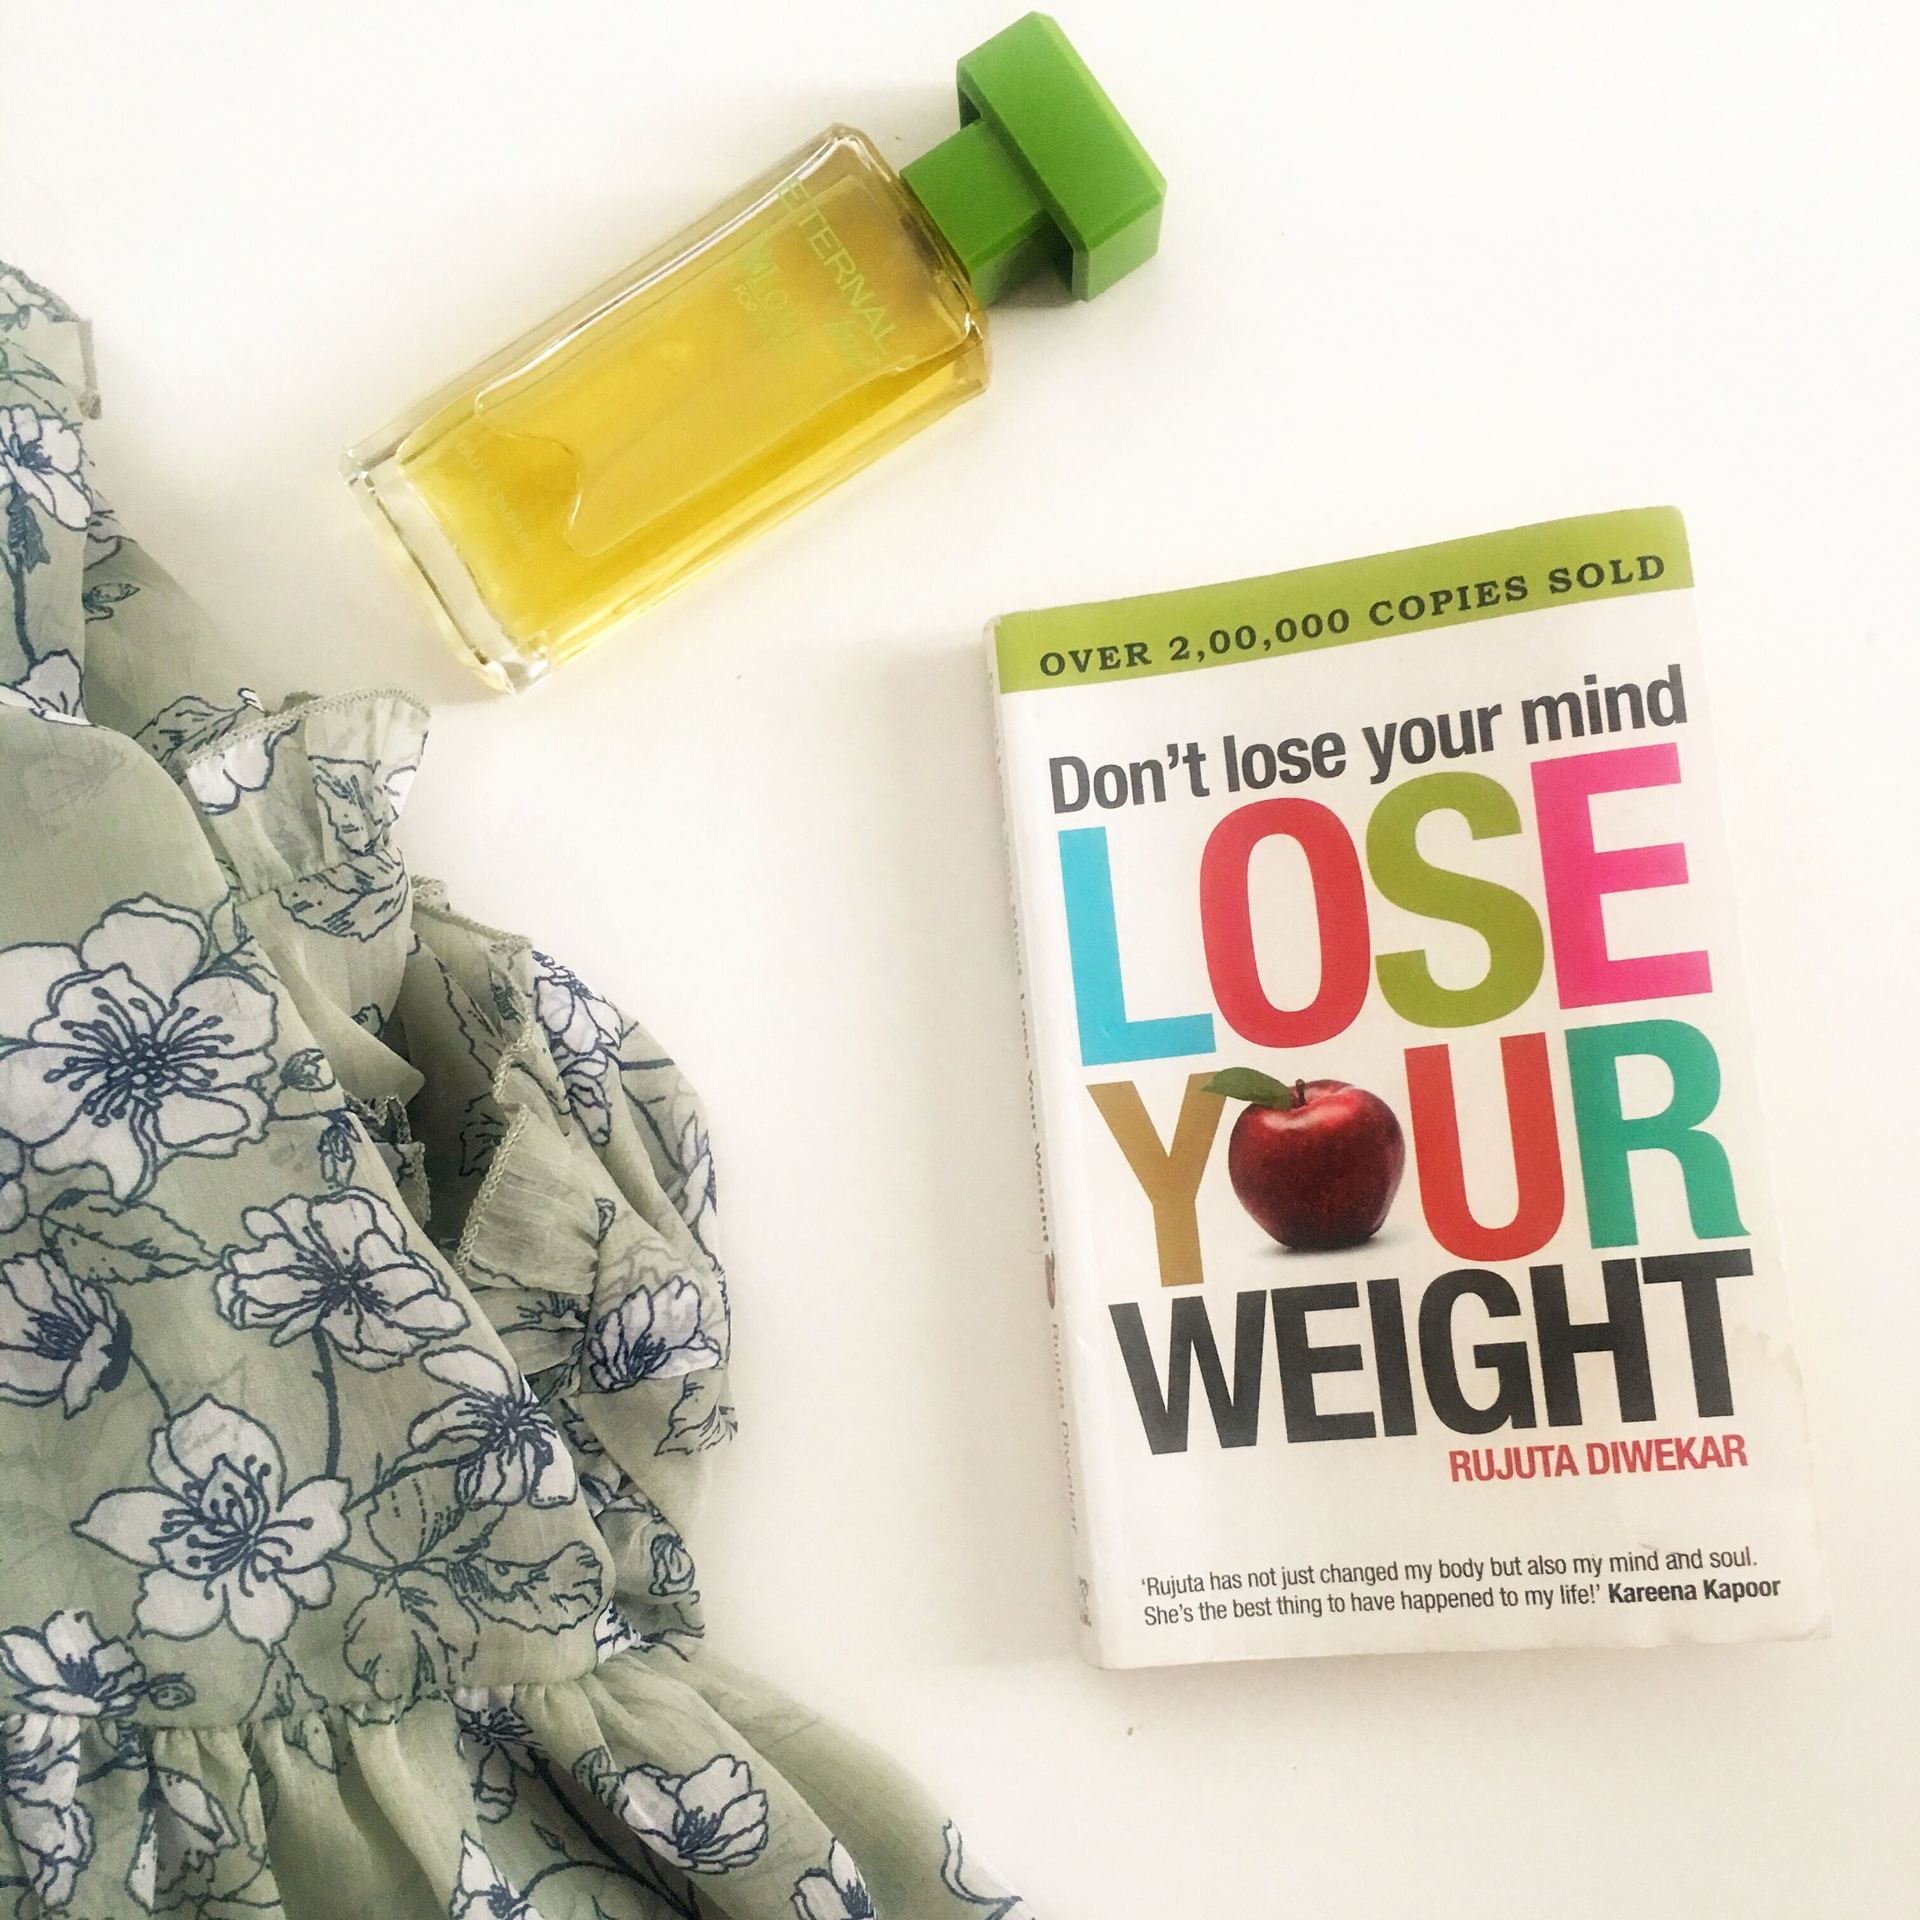 Dont lose your mind. Lose your weight - The Book image